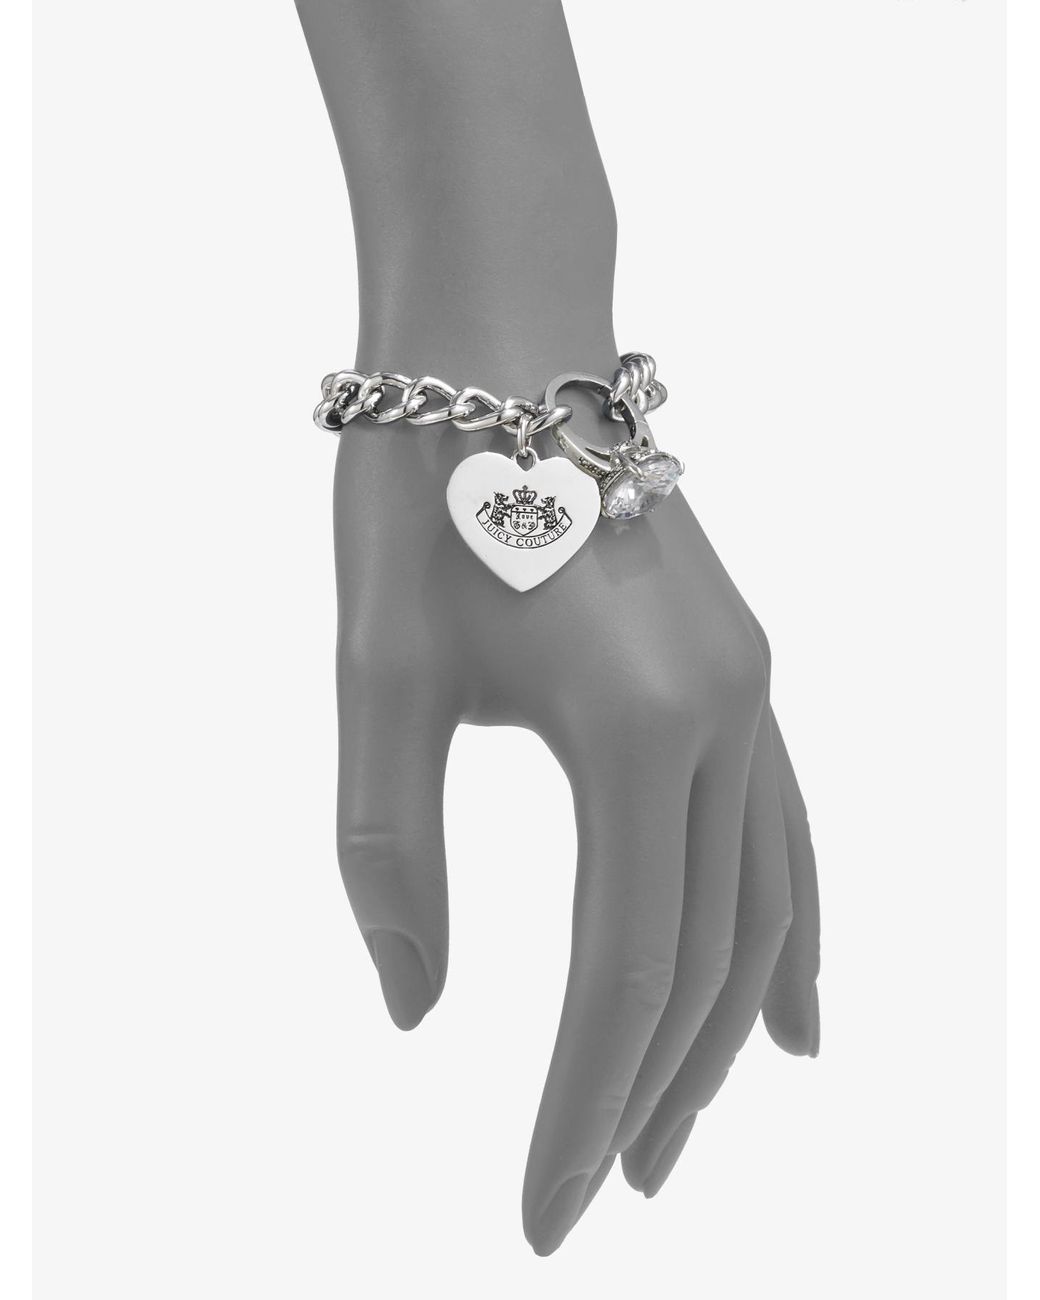 Juicy Couture Engagement Ring Charm Bracelet in Metallic | Lyst